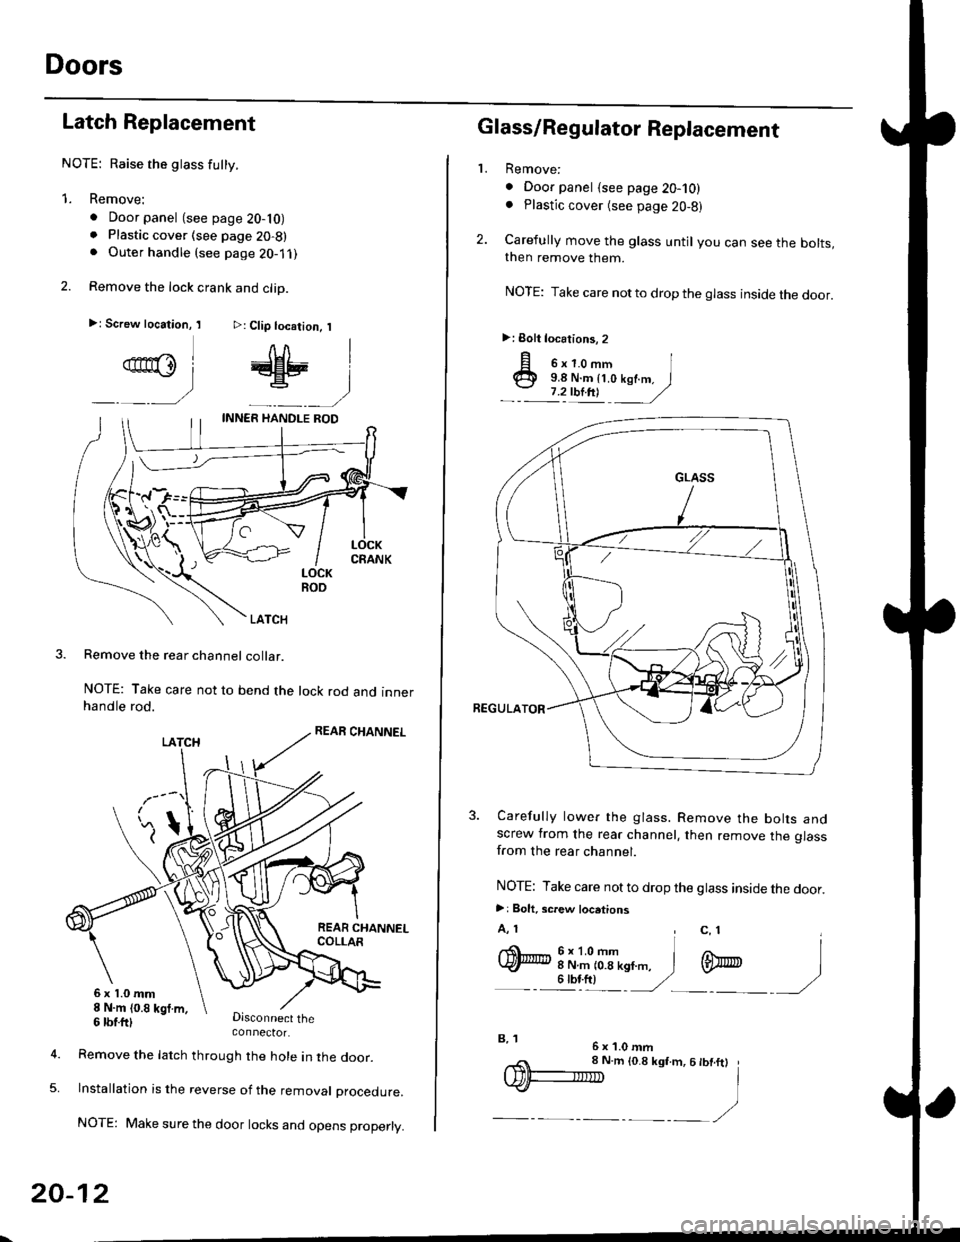 HONDA CIVIC 1997 6.G Workshop Manual Doors
Latch Replacement
NOTE: Raise the glass futty.
1. Remove:
. Door panel (see page 20-10). Plastic cover (see page 20-8). Outer handle (see page 2O-1 ,l
2. Remove the lock crank and clip.
>: Screw